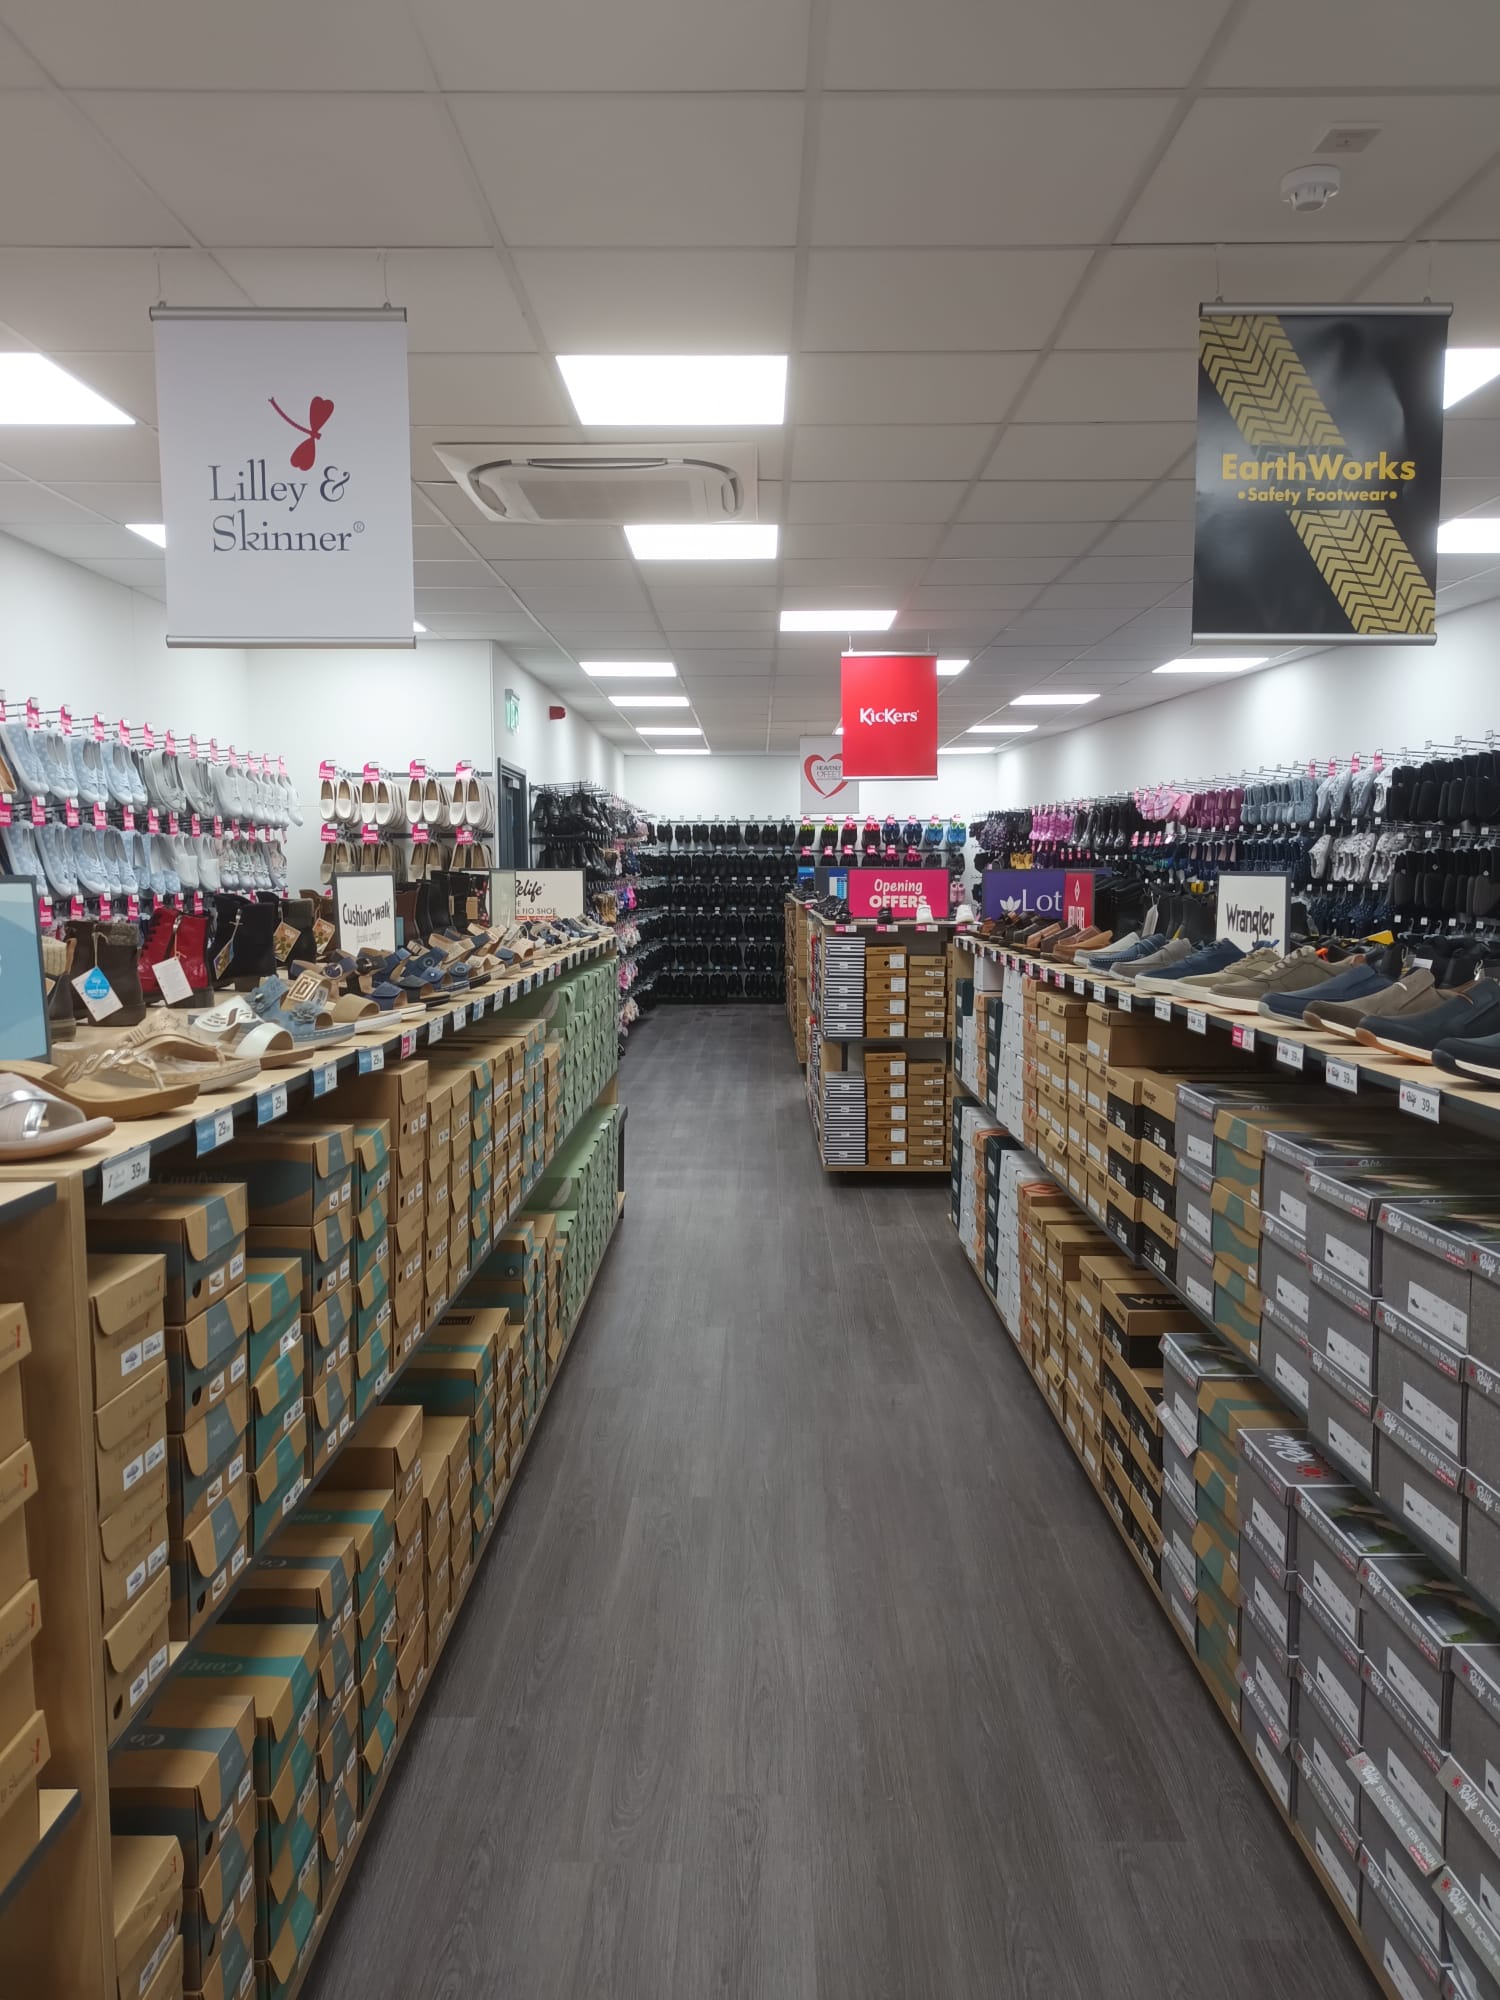 shoezone is stocking a huge selection of its own brands and other popular brands